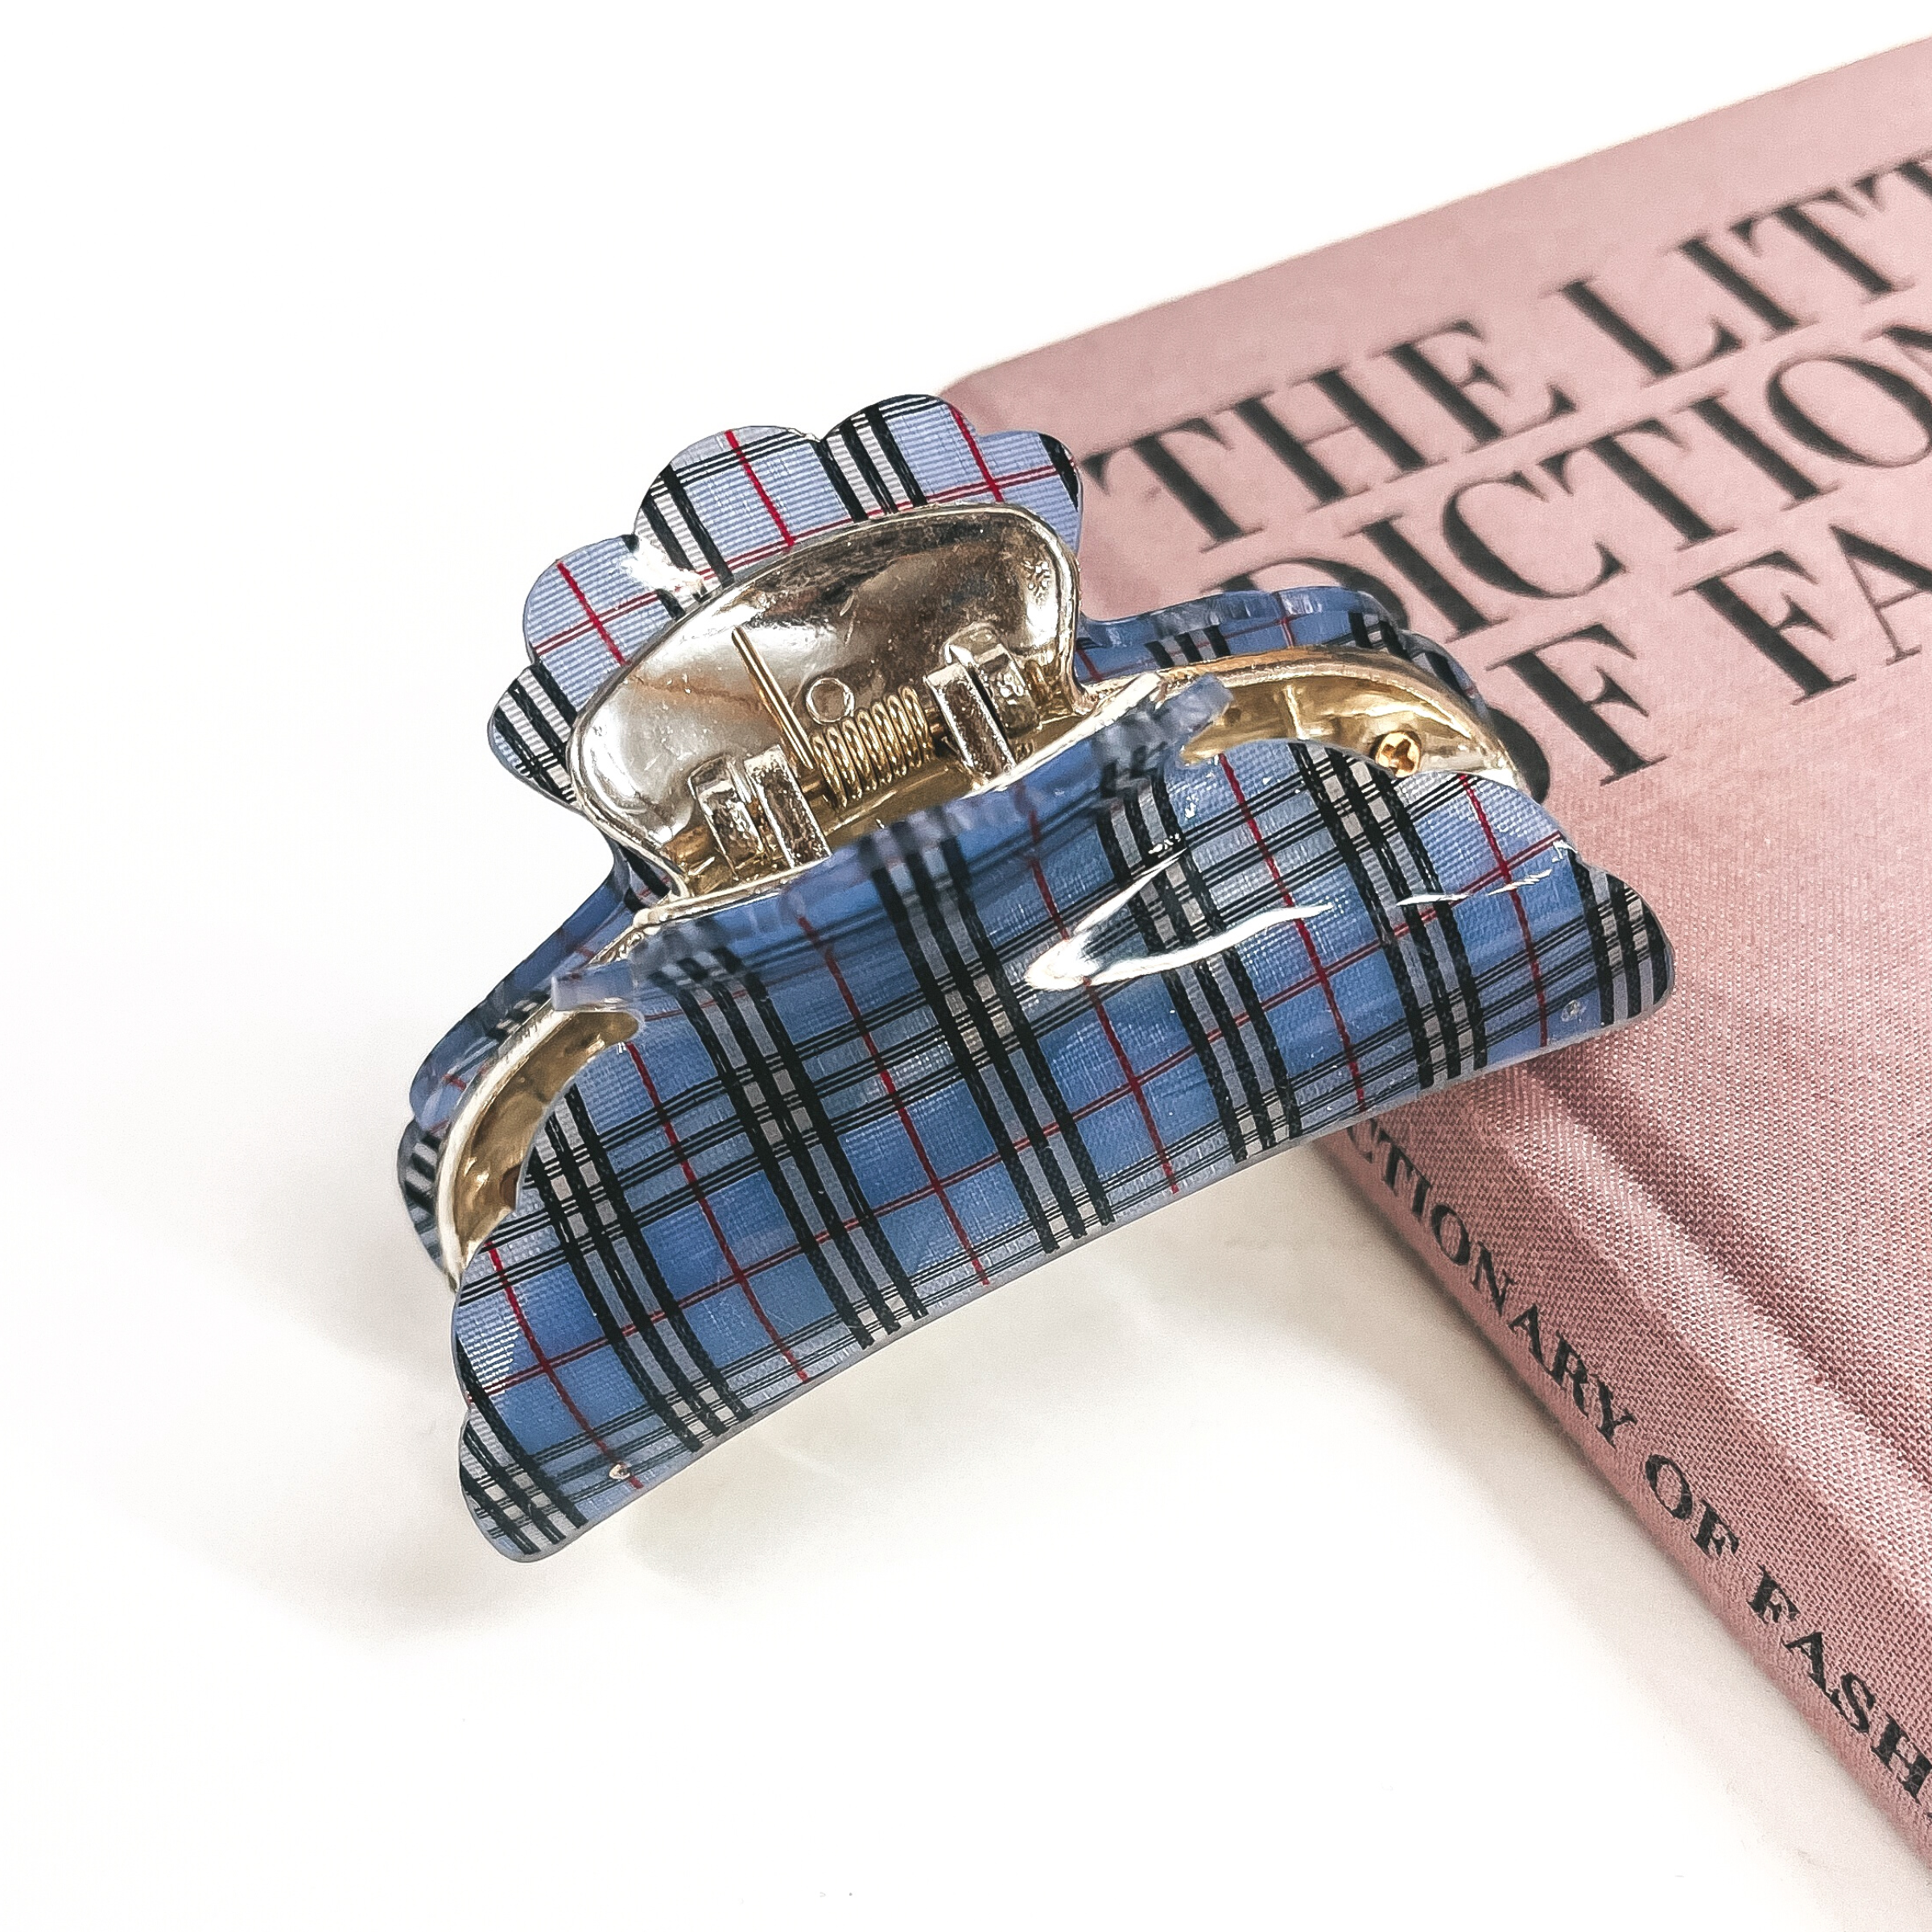 This is a gold and blue plaid print hair clip laying on the side of a pink book and white background.